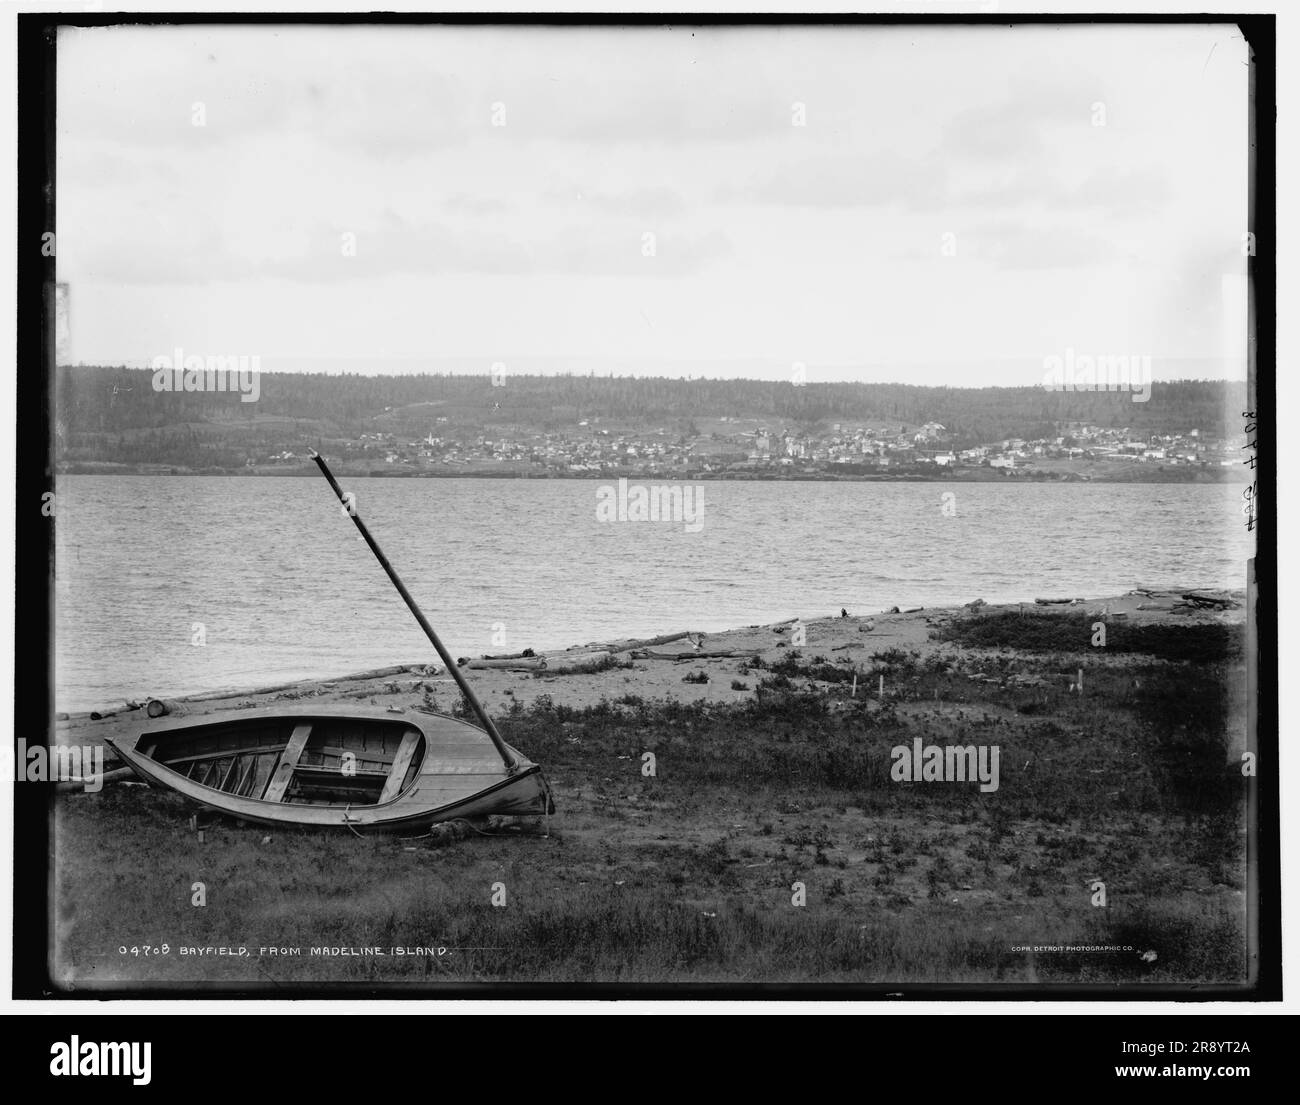 Bayfield from Madeline Island, between 1880 and 1899. Stock Photo